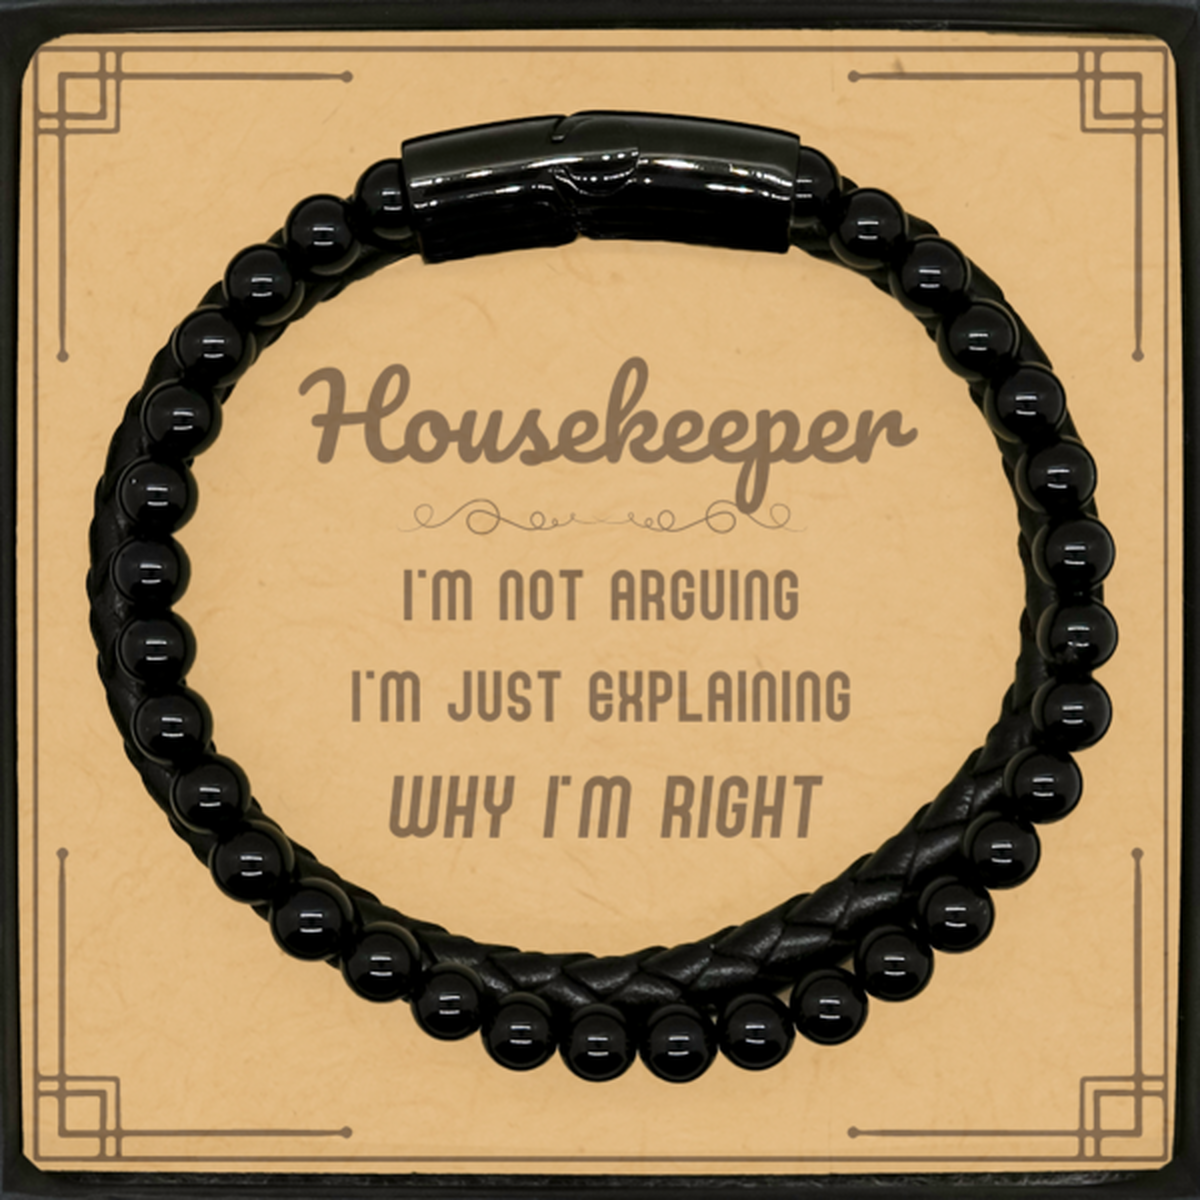 Housekeeper I'm not Arguing. I'm Just Explaining Why I'm RIGHT Stone Leather Bracelets, Funny Saying Quote Housekeeper Gifts For Housekeeper Message Card Graduation Birthday Christmas Gifts for Men Women Coworker